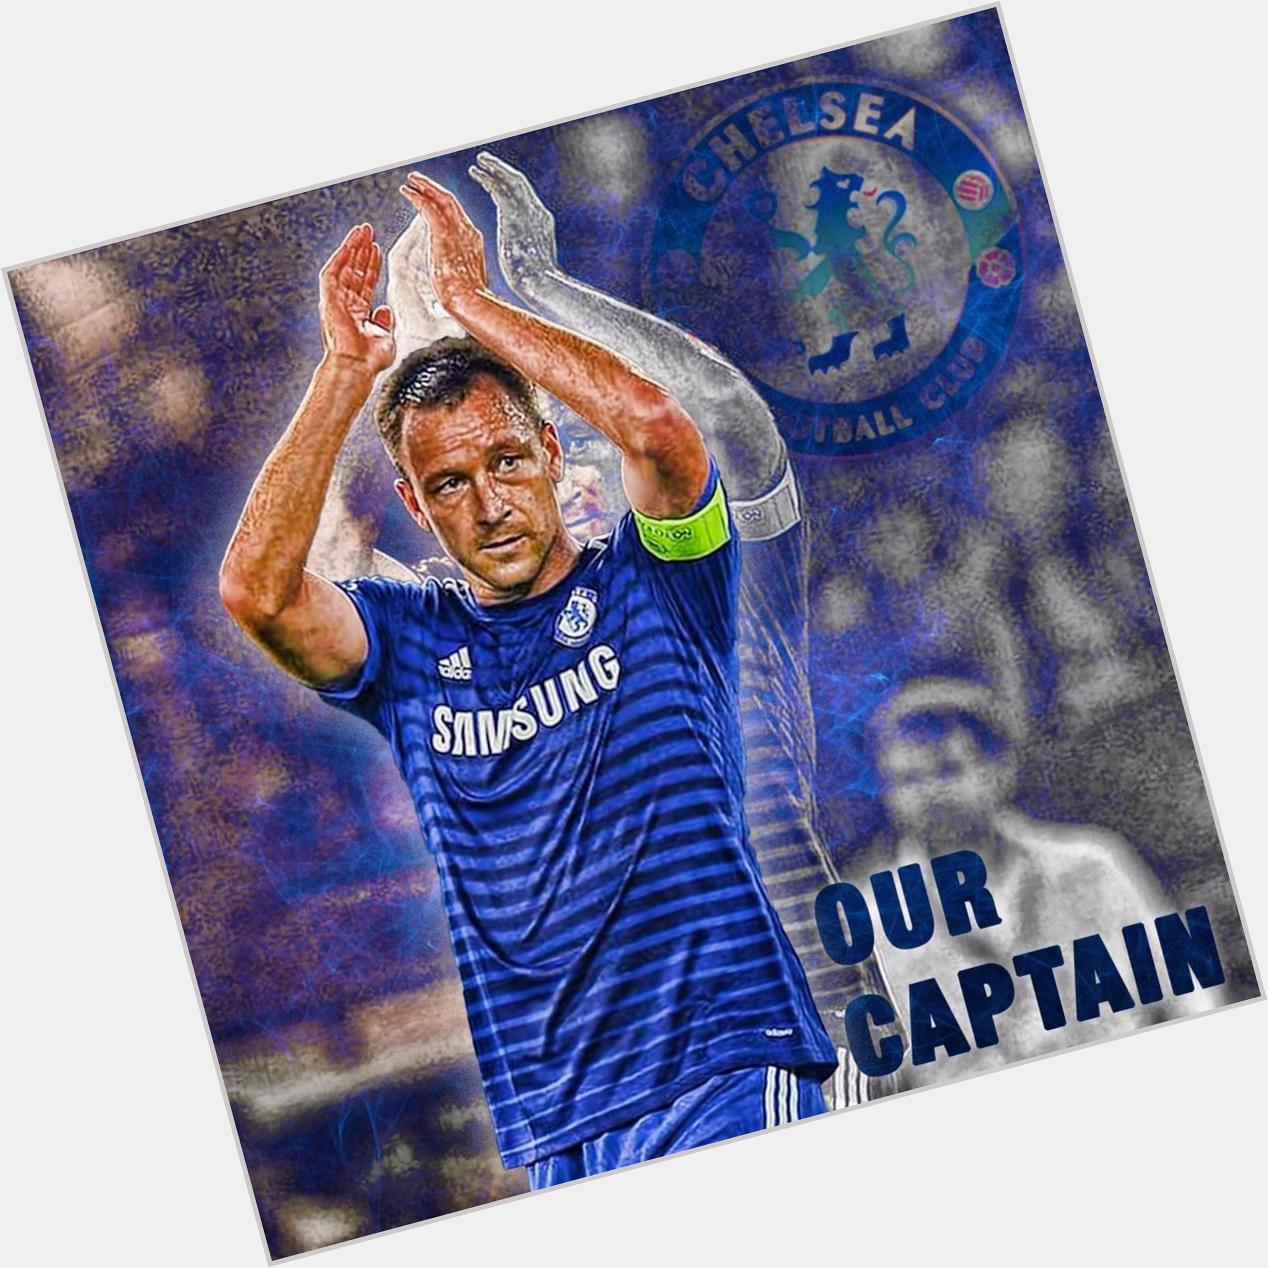 Happy 34th birthday to our Captain, Leader, Legend John Terry 